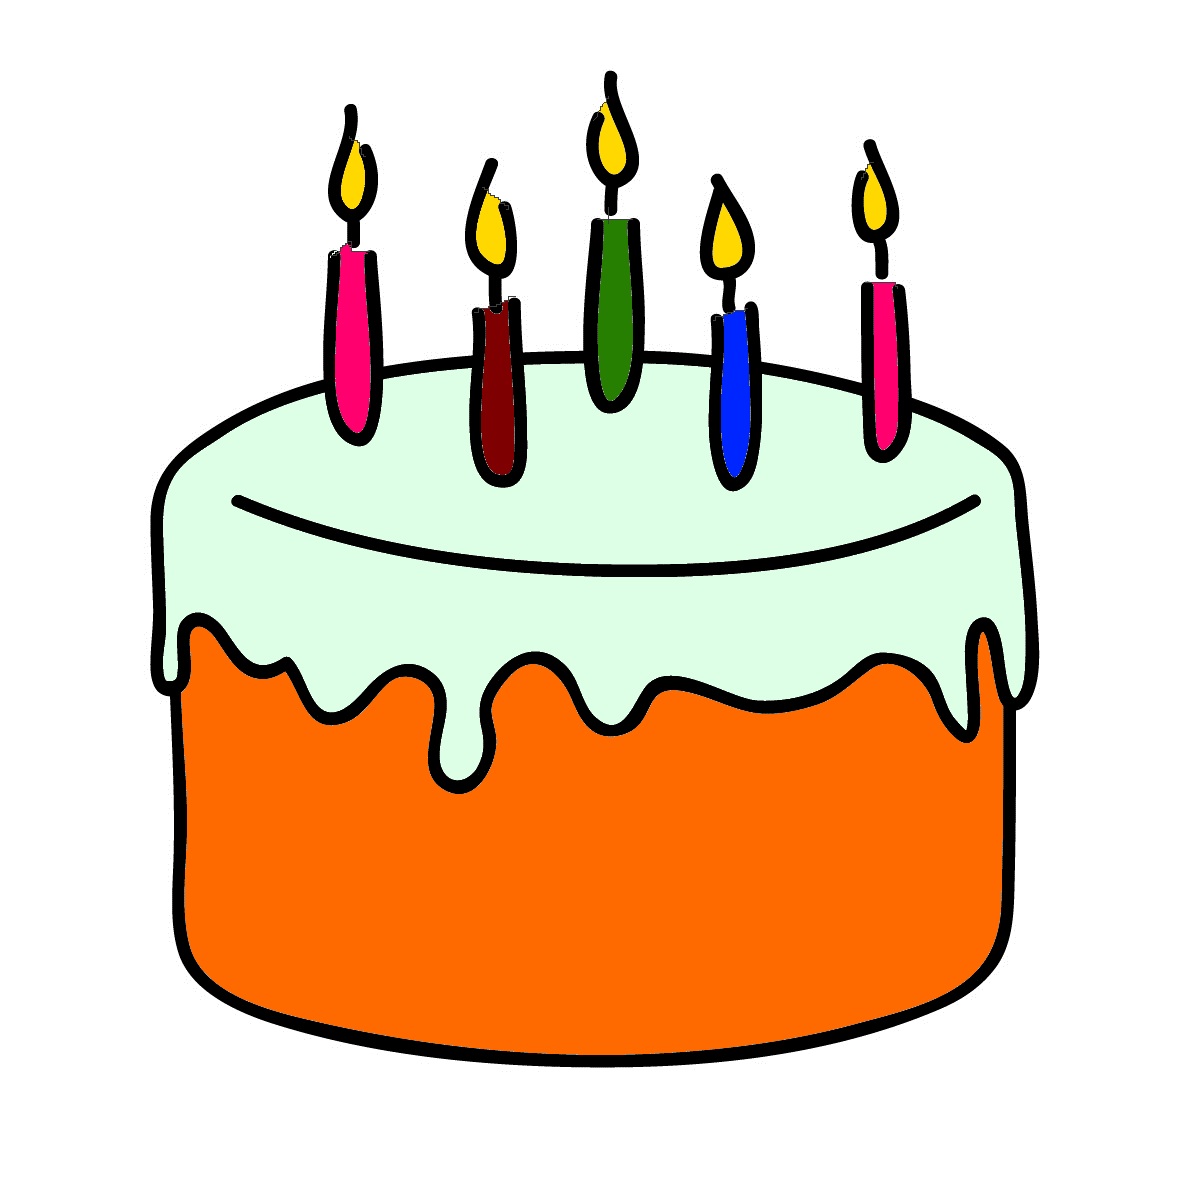 Happy Birthday Cake Icon Vector Illustration Graphic Design Royalty Free  SVG, Cliparts, Vectors, and Stock Illustration. Image 67910214.